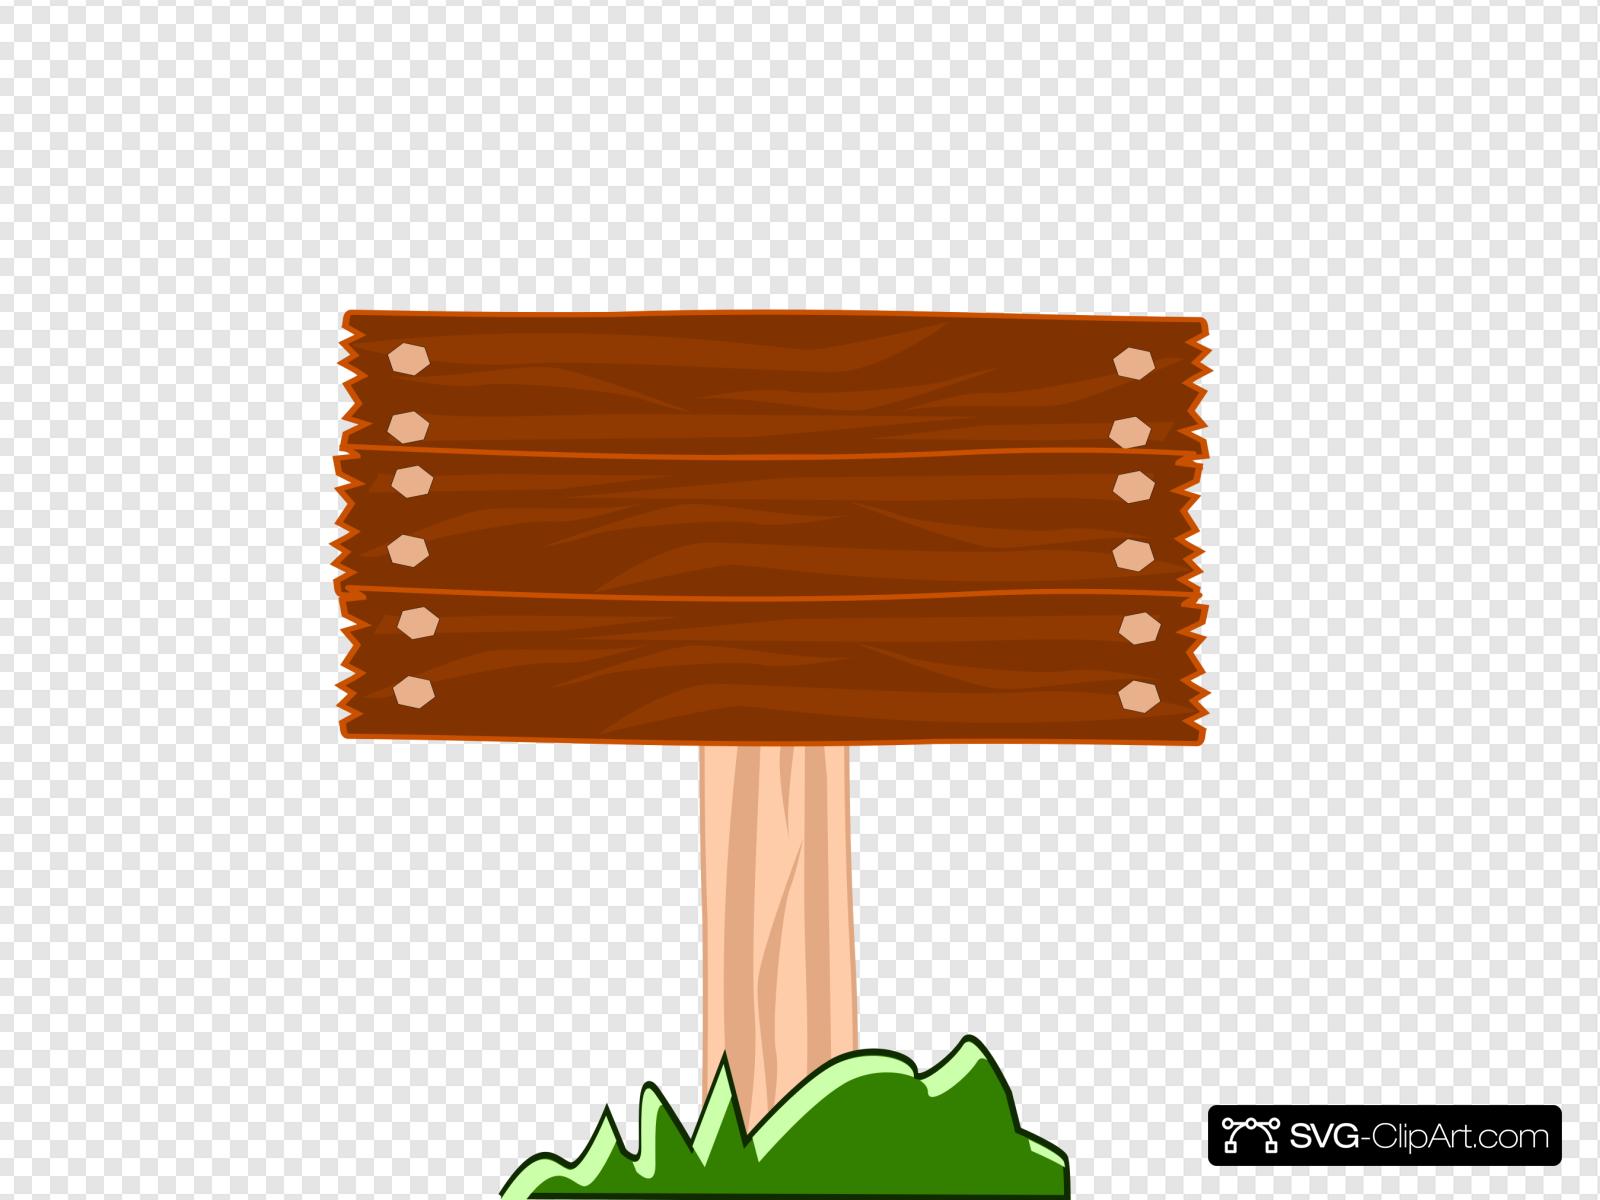 Wood Street Sign Clip art, Icon and SVG.